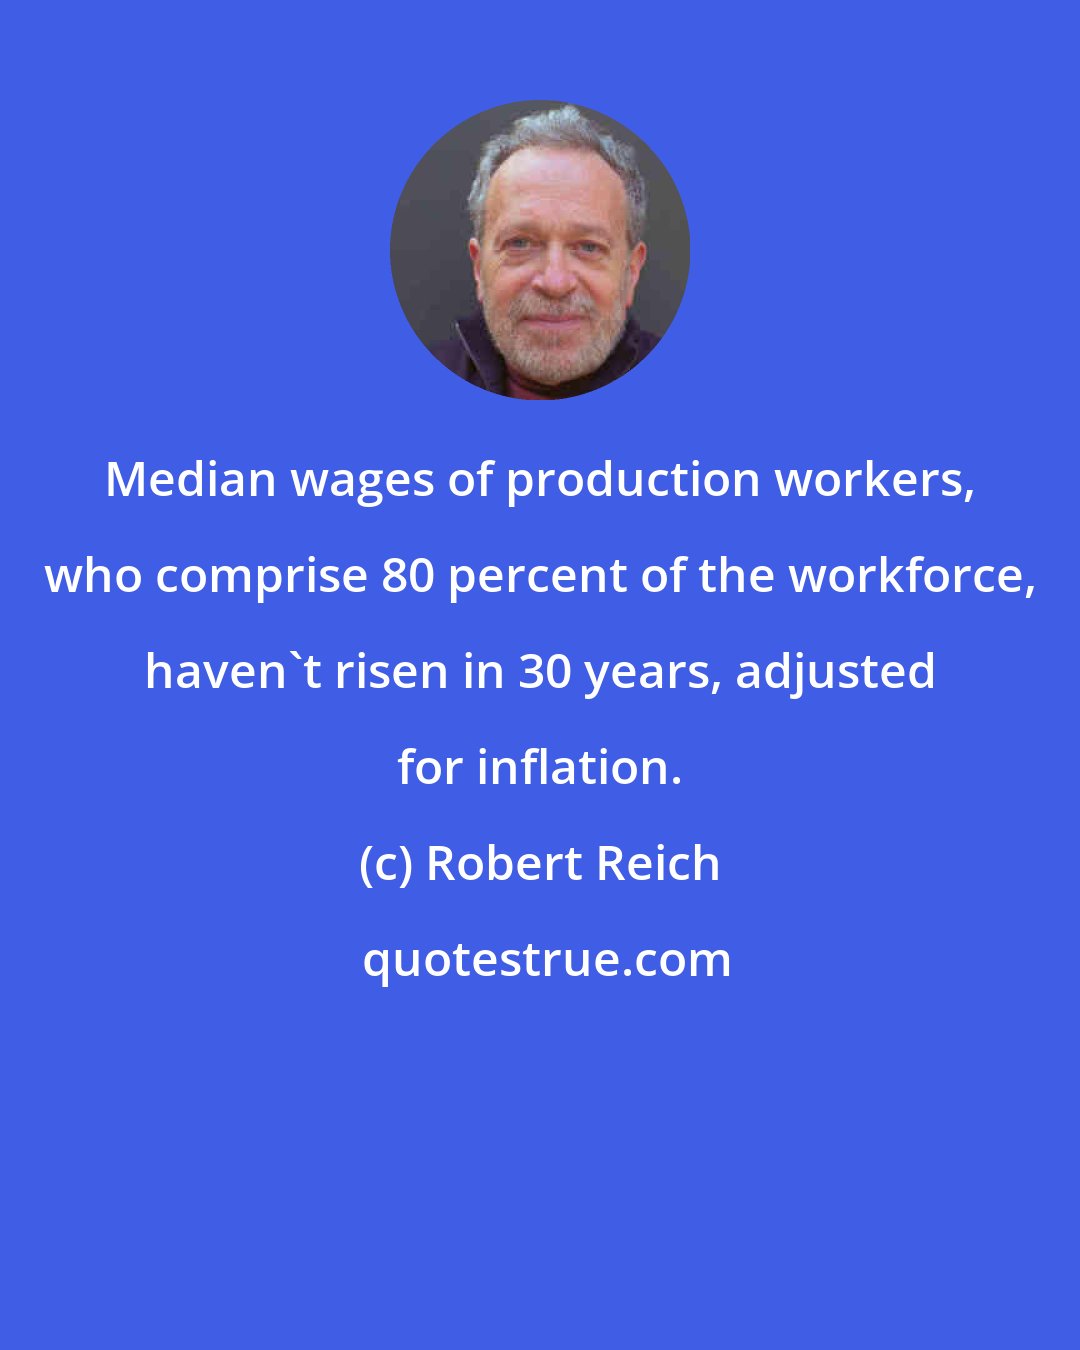 Robert Reich: Median wages of production workers, who comprise 80 percent of the workforce, haven't risen in 30 years, adjusted for inflation.